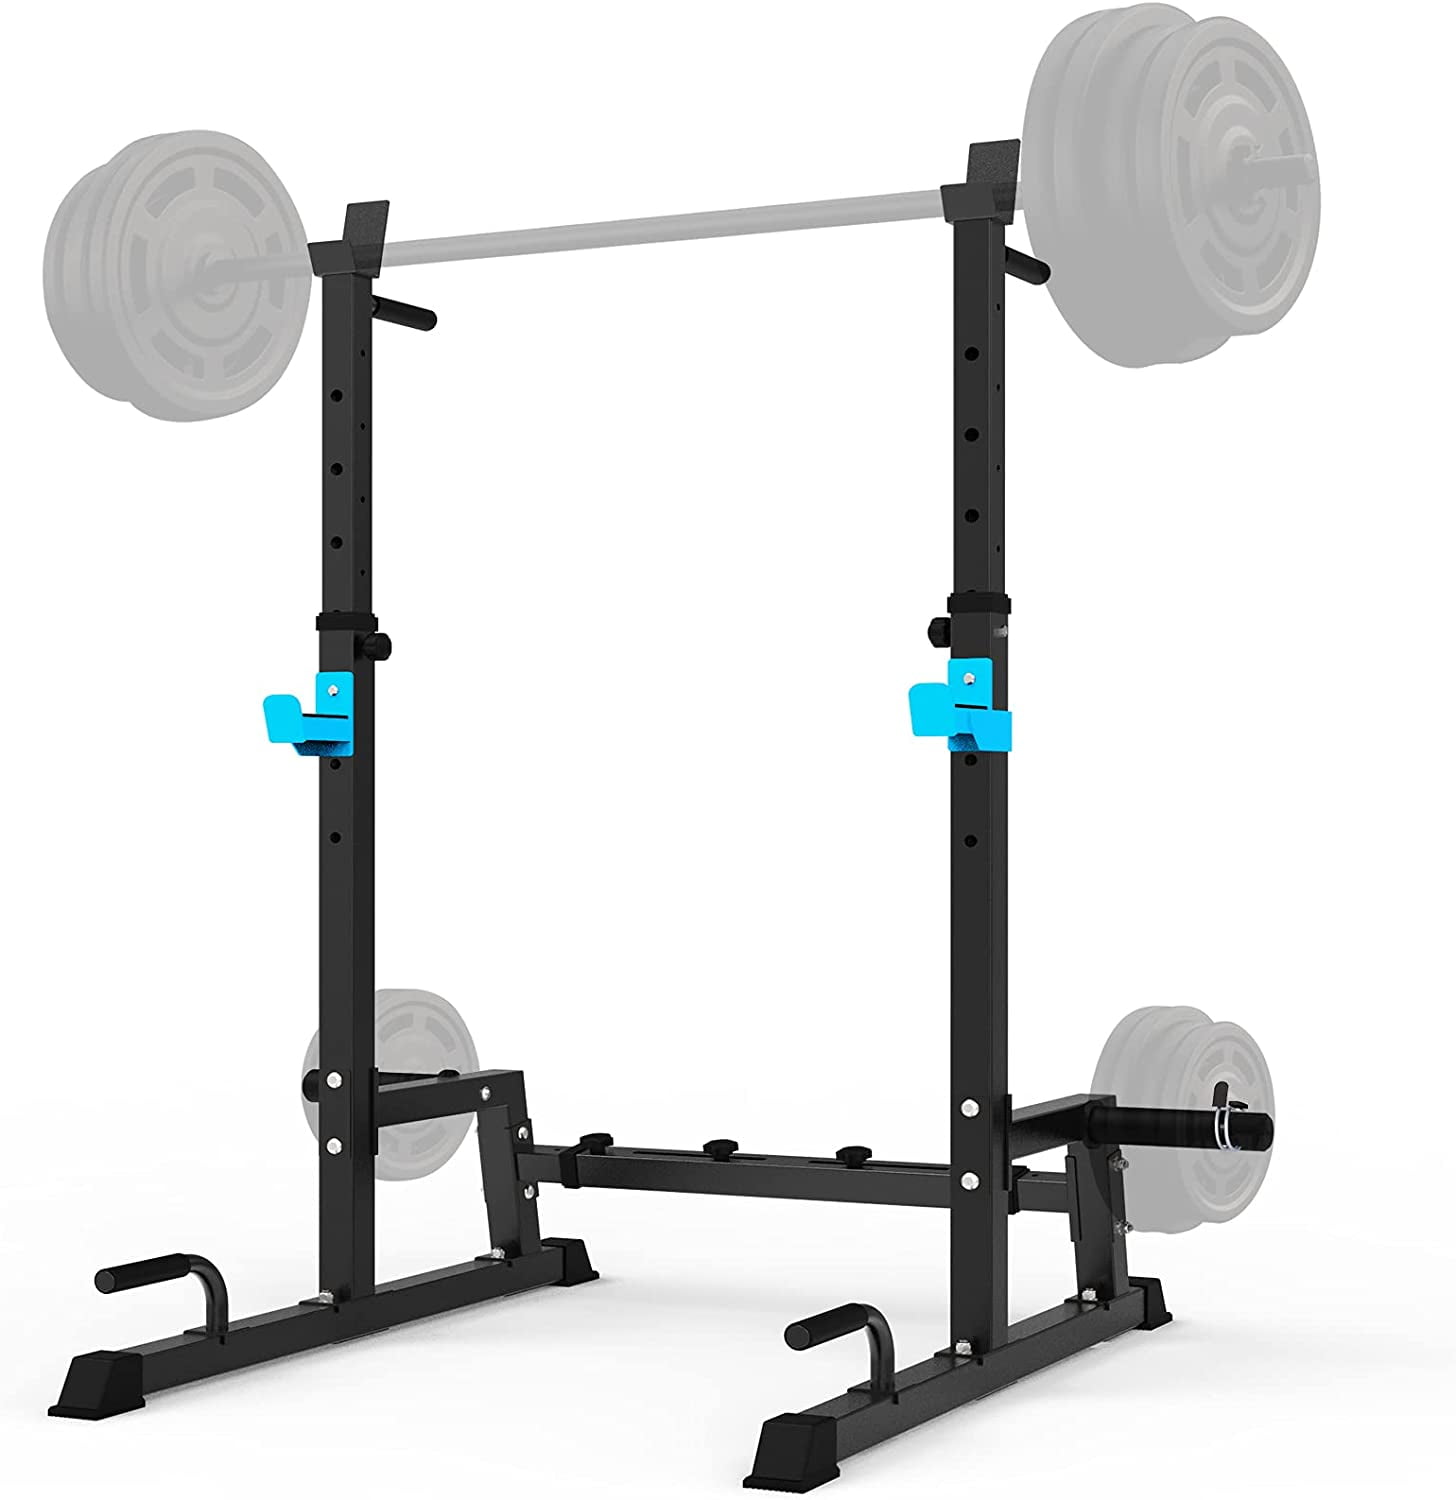 Dumbbell bench Weight table dumbbell bench home fitness equipment sit-up aid folding bench press multi-function supine board Color : Black, Size : 70 * 45 * 48cm